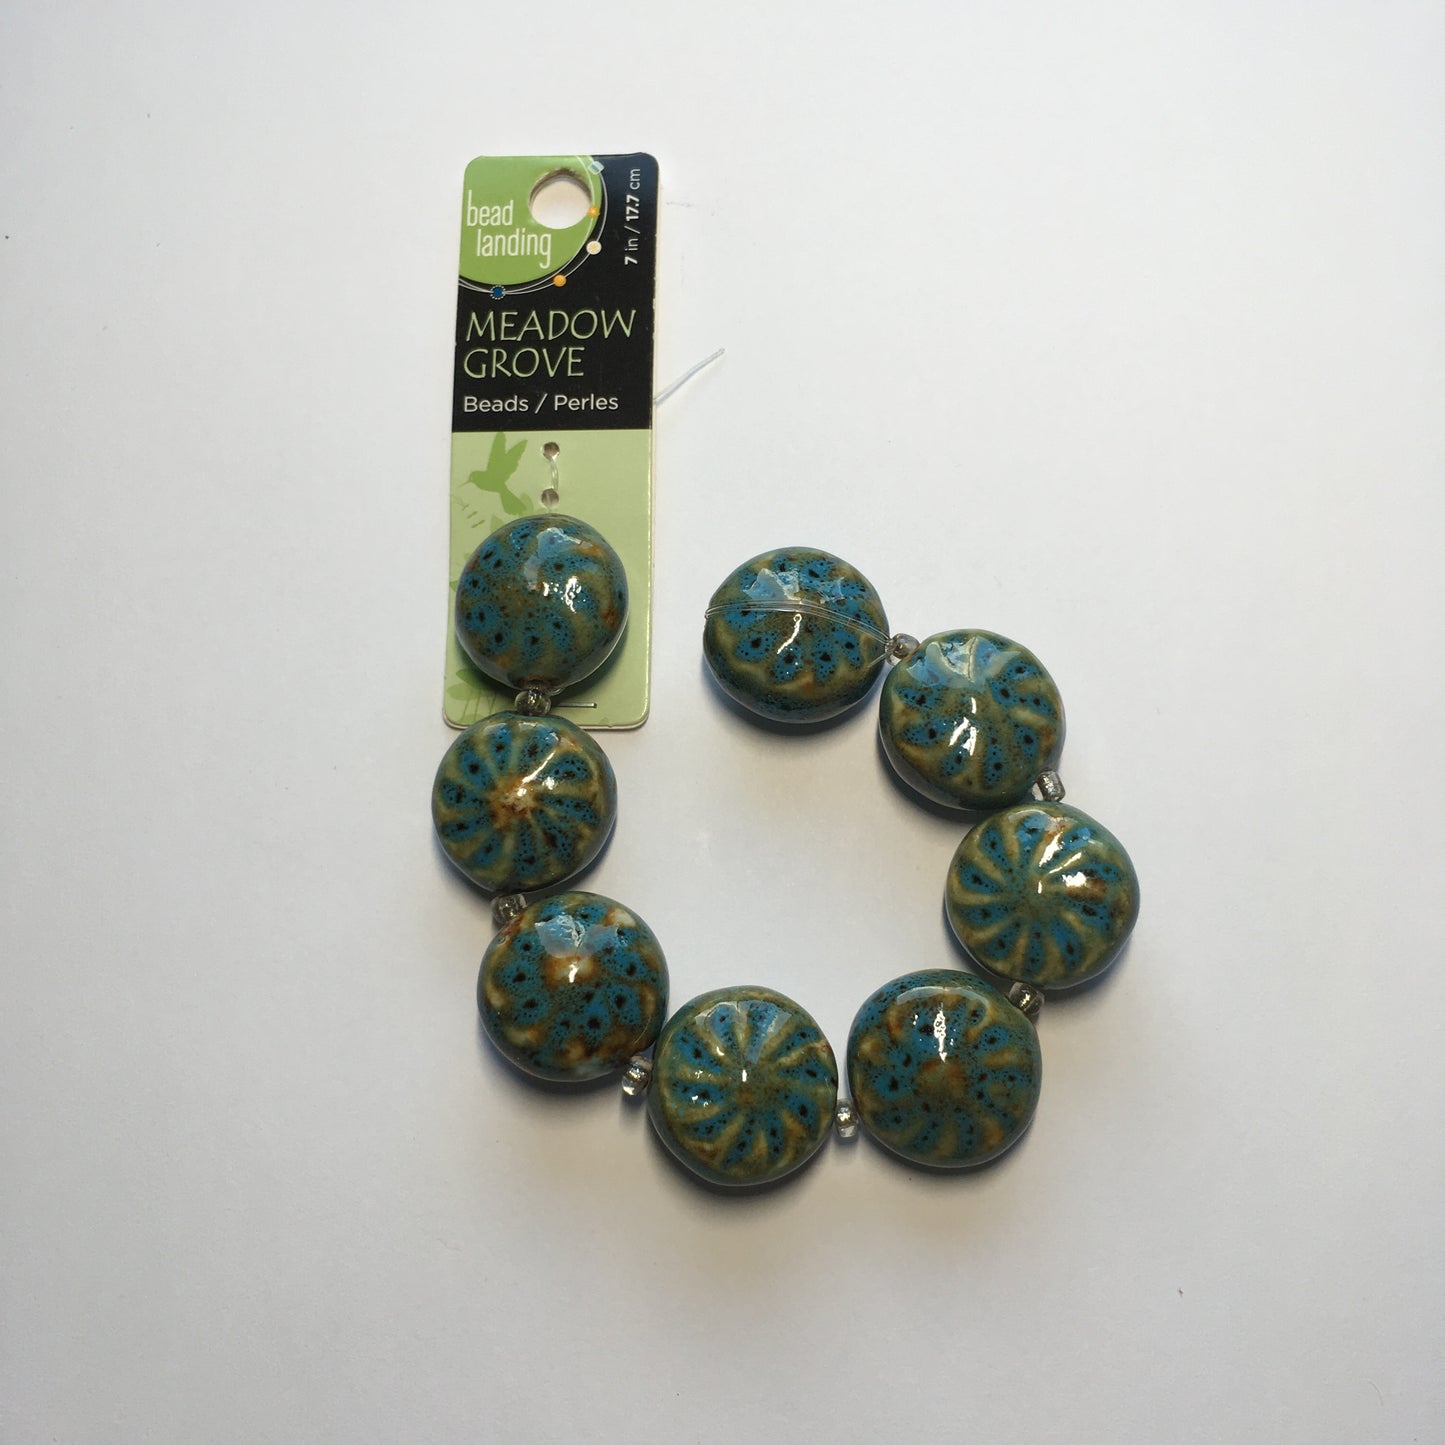 Bead Landing Meadow Grove Green/Blue Speckled Ceramic Beads, 22 mm - 7 Beads